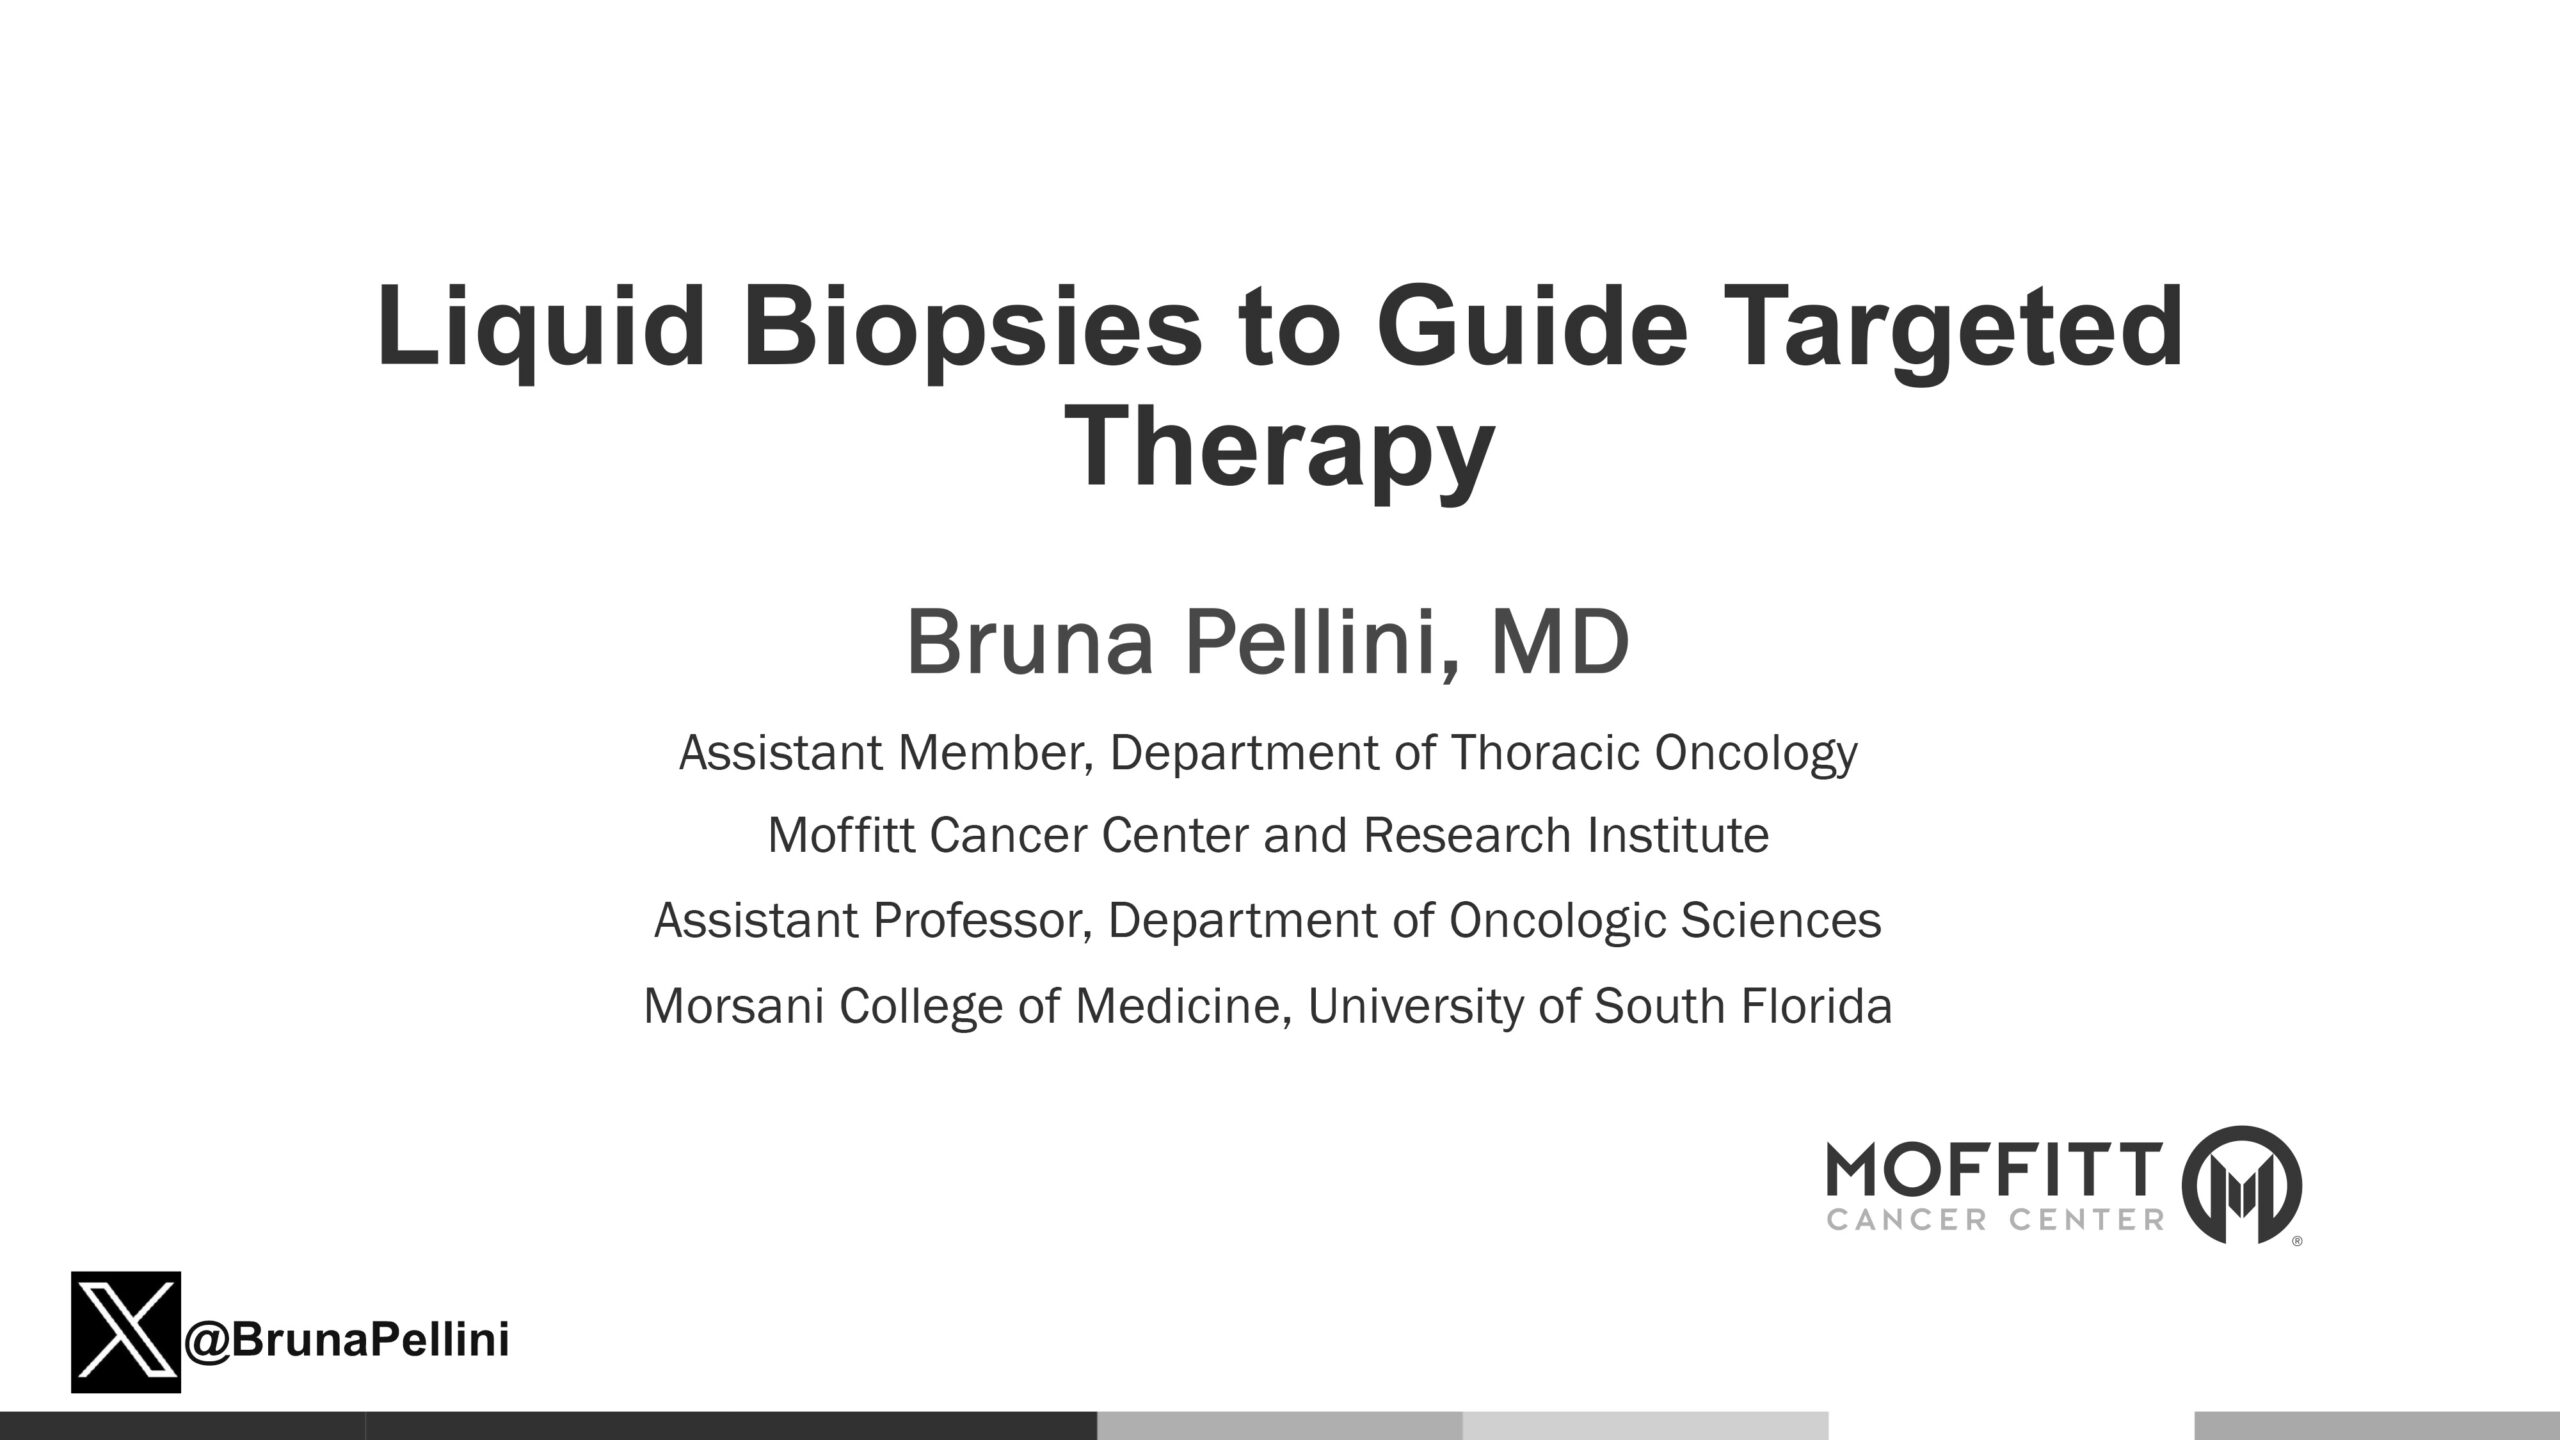 Liquid Biopsies to Guide Targeted Therapy